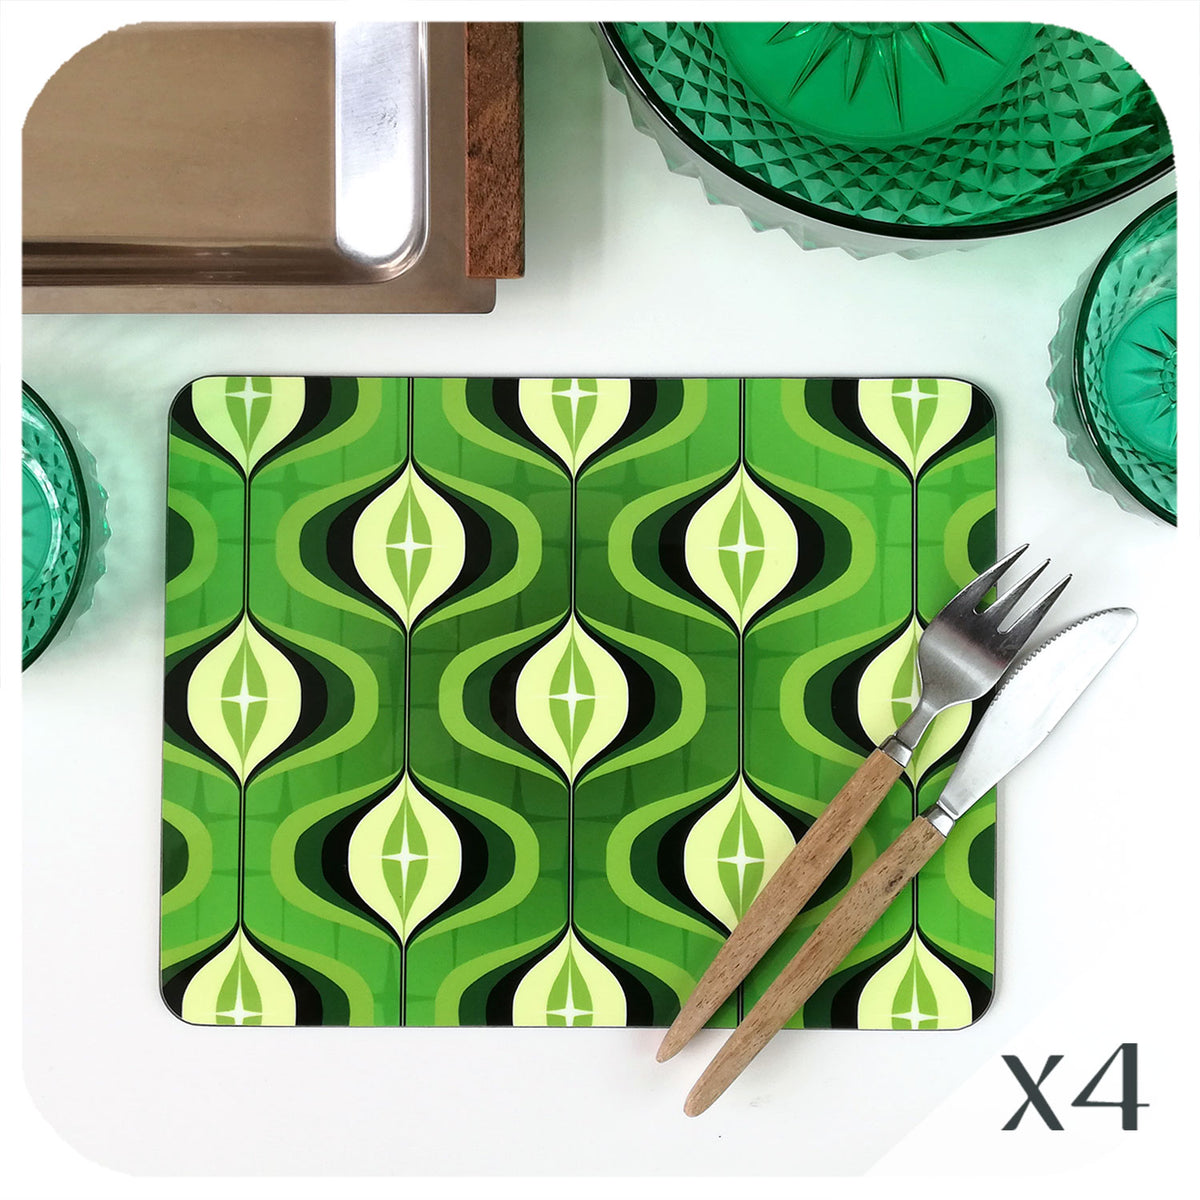 1970s Green Op Art Placemats, set of 4 | The Inkabilly Emporium